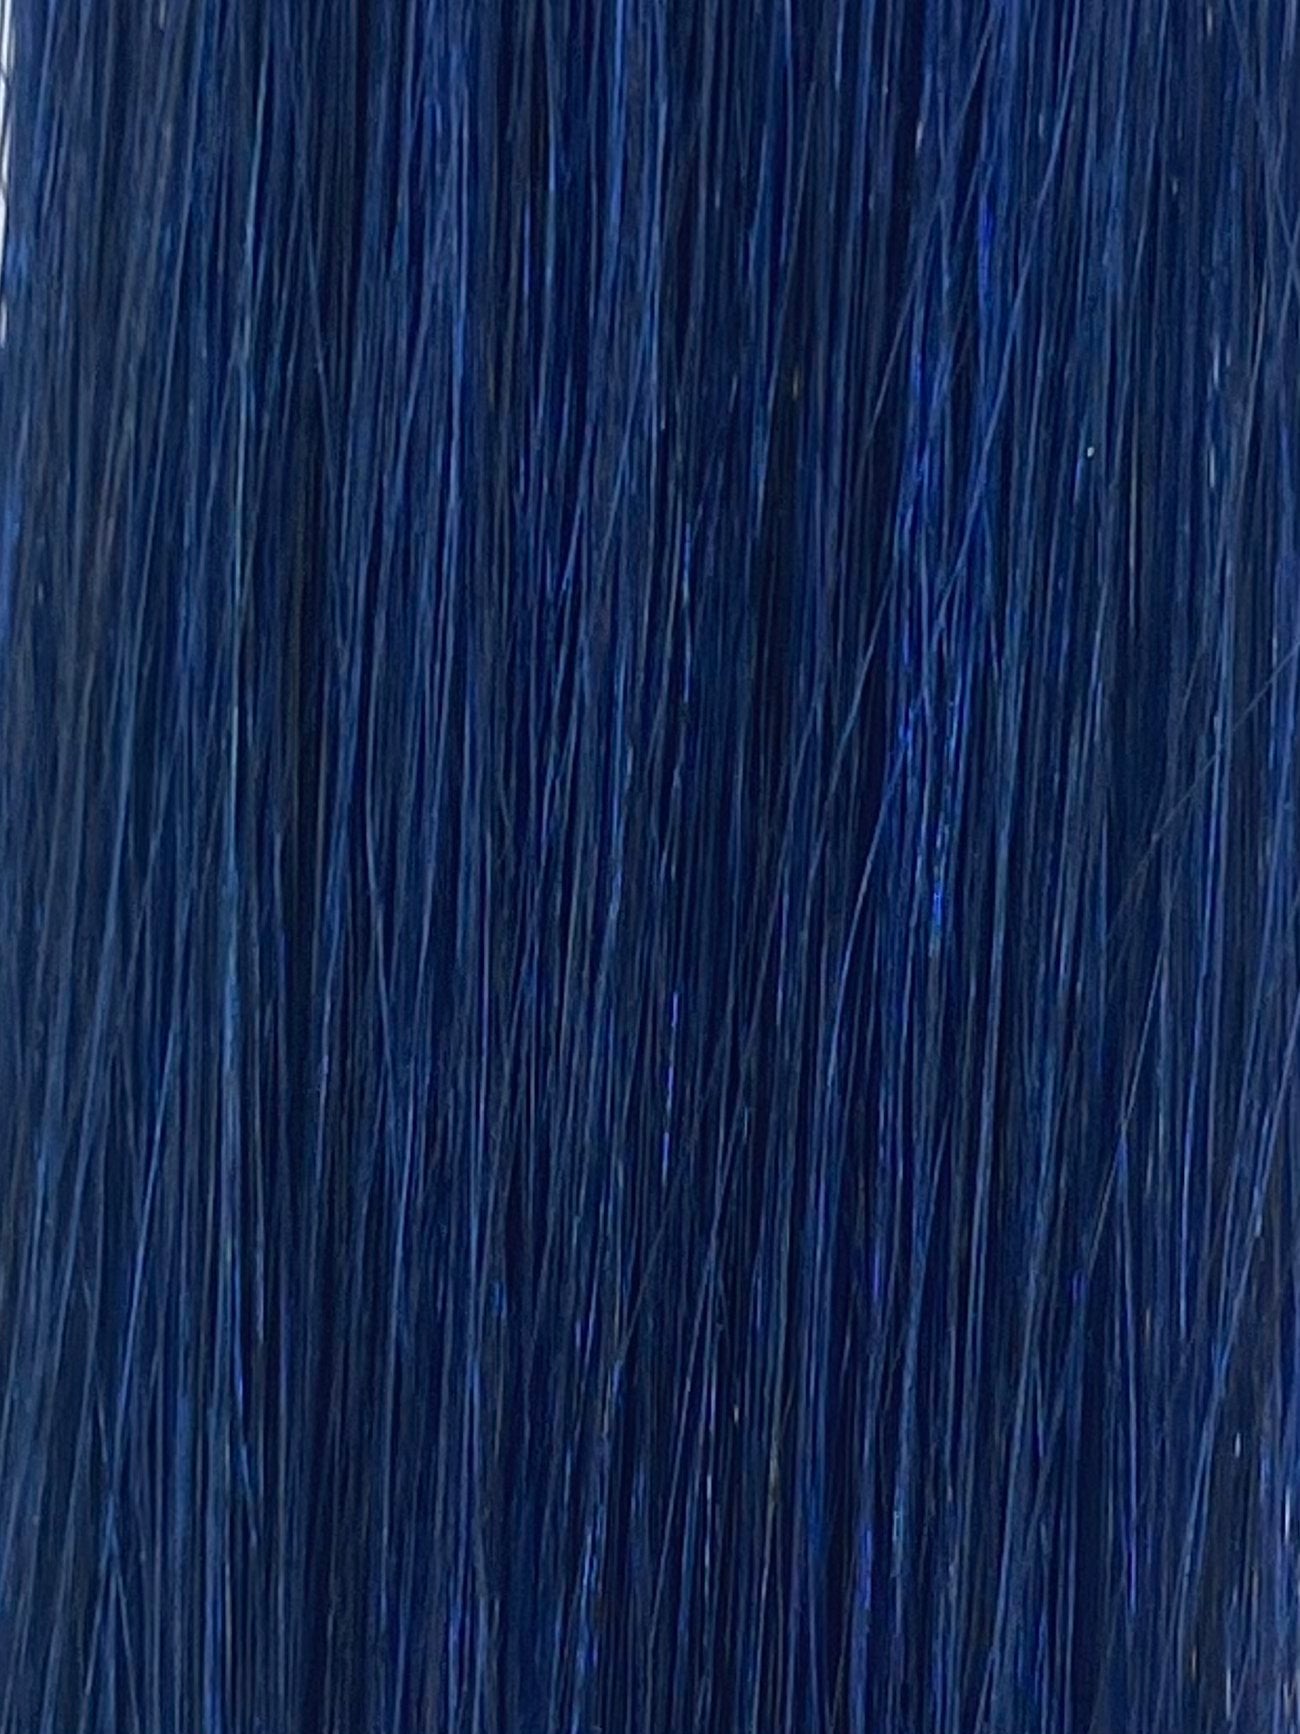 Tape in hair extensions #Blue - 50cm/ 20inches - Blue Tape Euro So Cap 